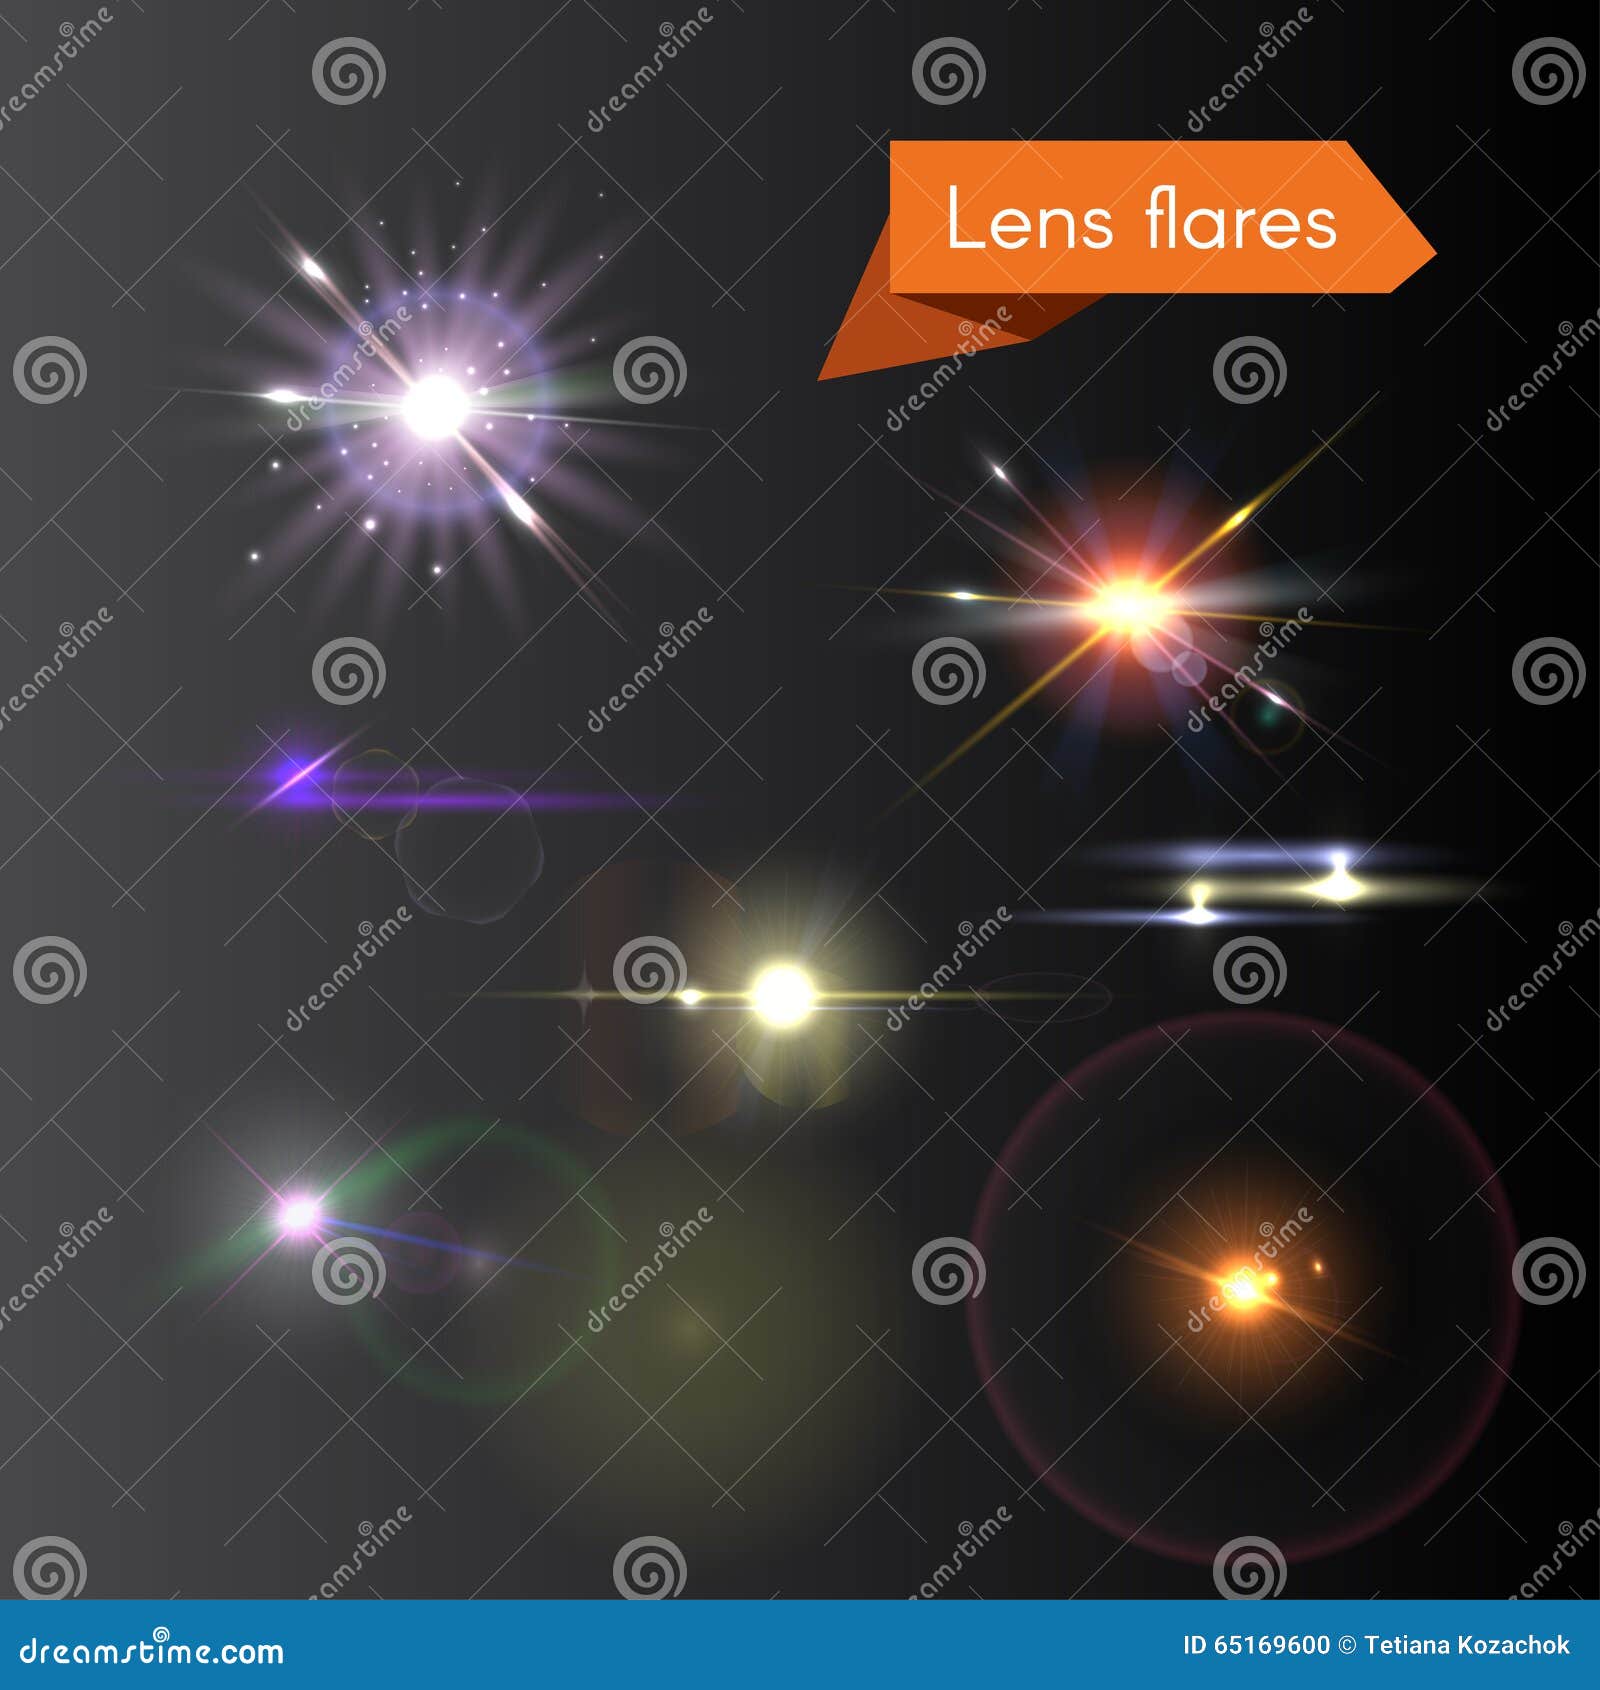 Lens Flares, Effect Of Light Refraction From Prism Or Diamond ...